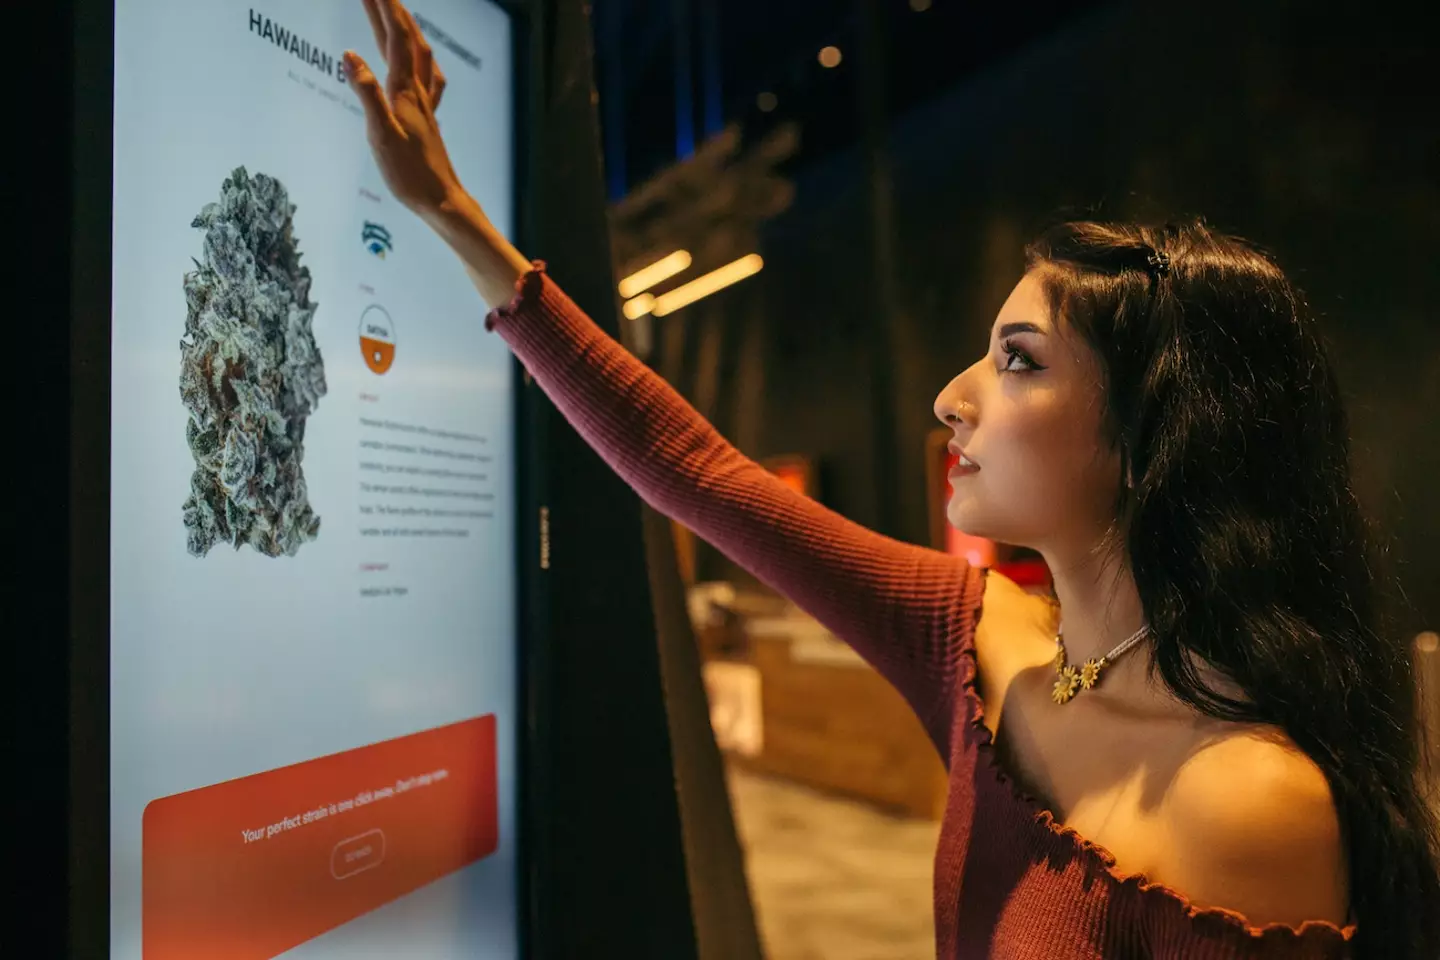 The superstore happens to also be an entertainment complex, which features entertainment and tech-art activations, along with massive digital displays where customers can click and collect their weed.